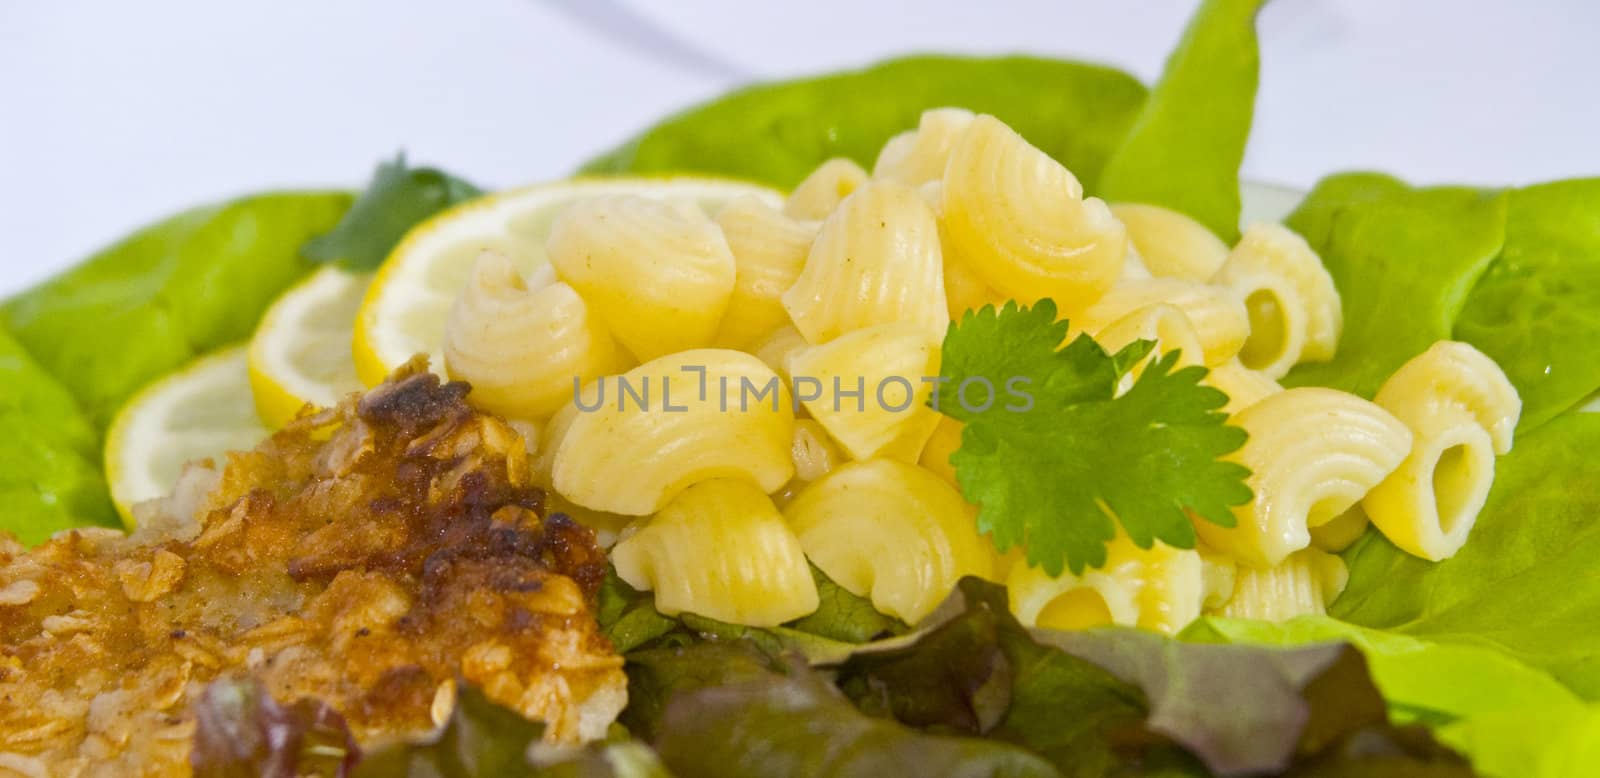 The image of macaroni of a fish and slices of a lemon close up